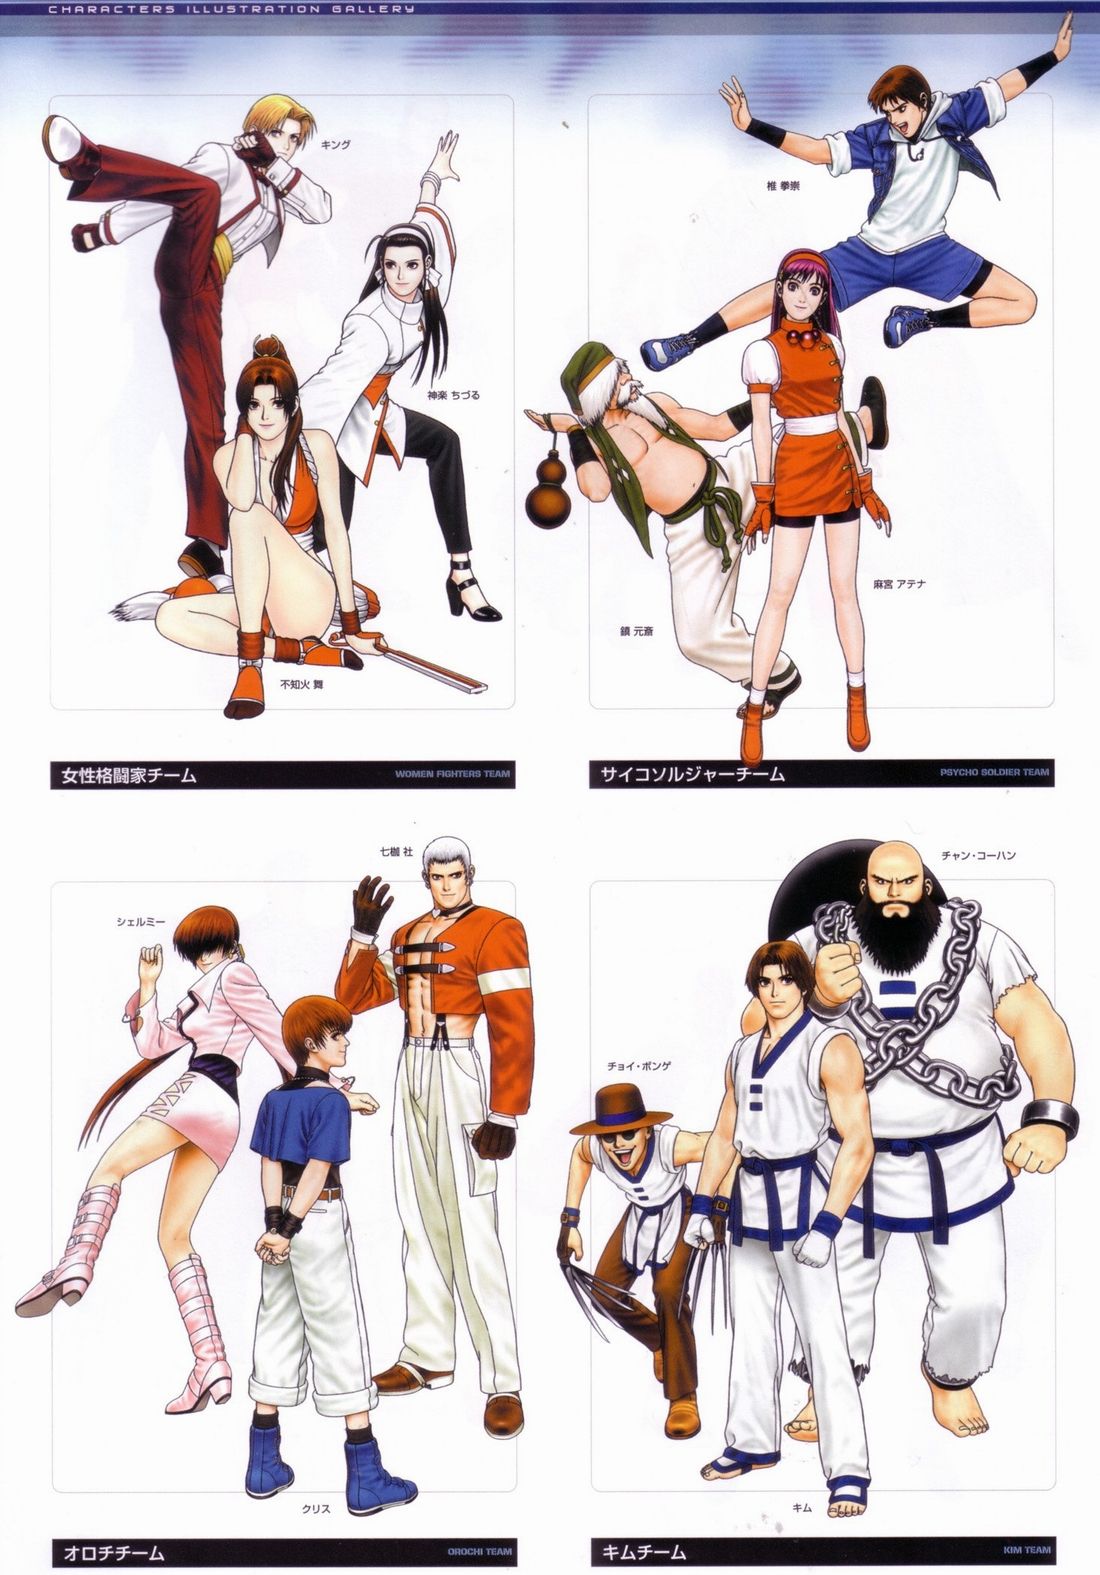 Artbook, -, King, Fighters, Fighting, Evolution, 10th